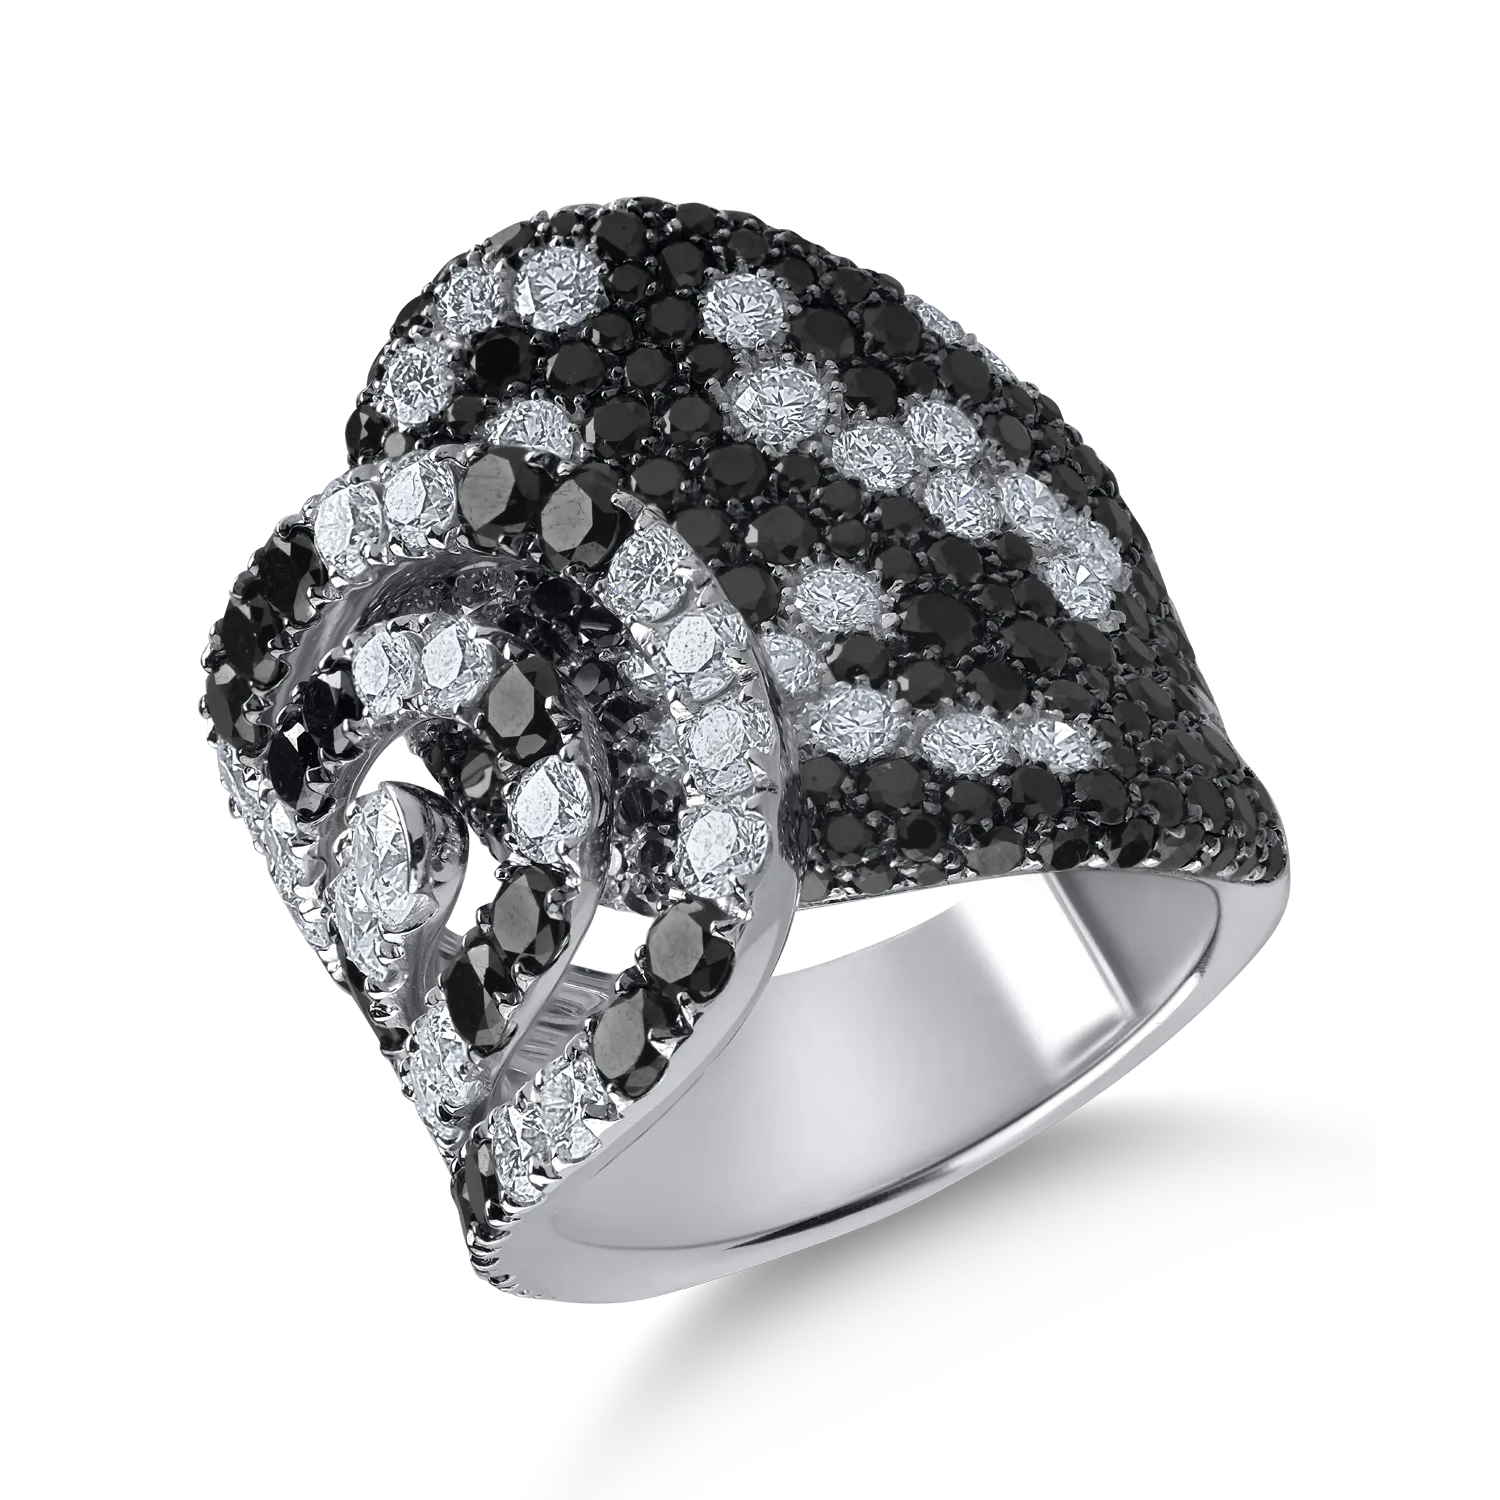 White gold ring with 3.12ct clear diamonds and 3.95ct black diamonds